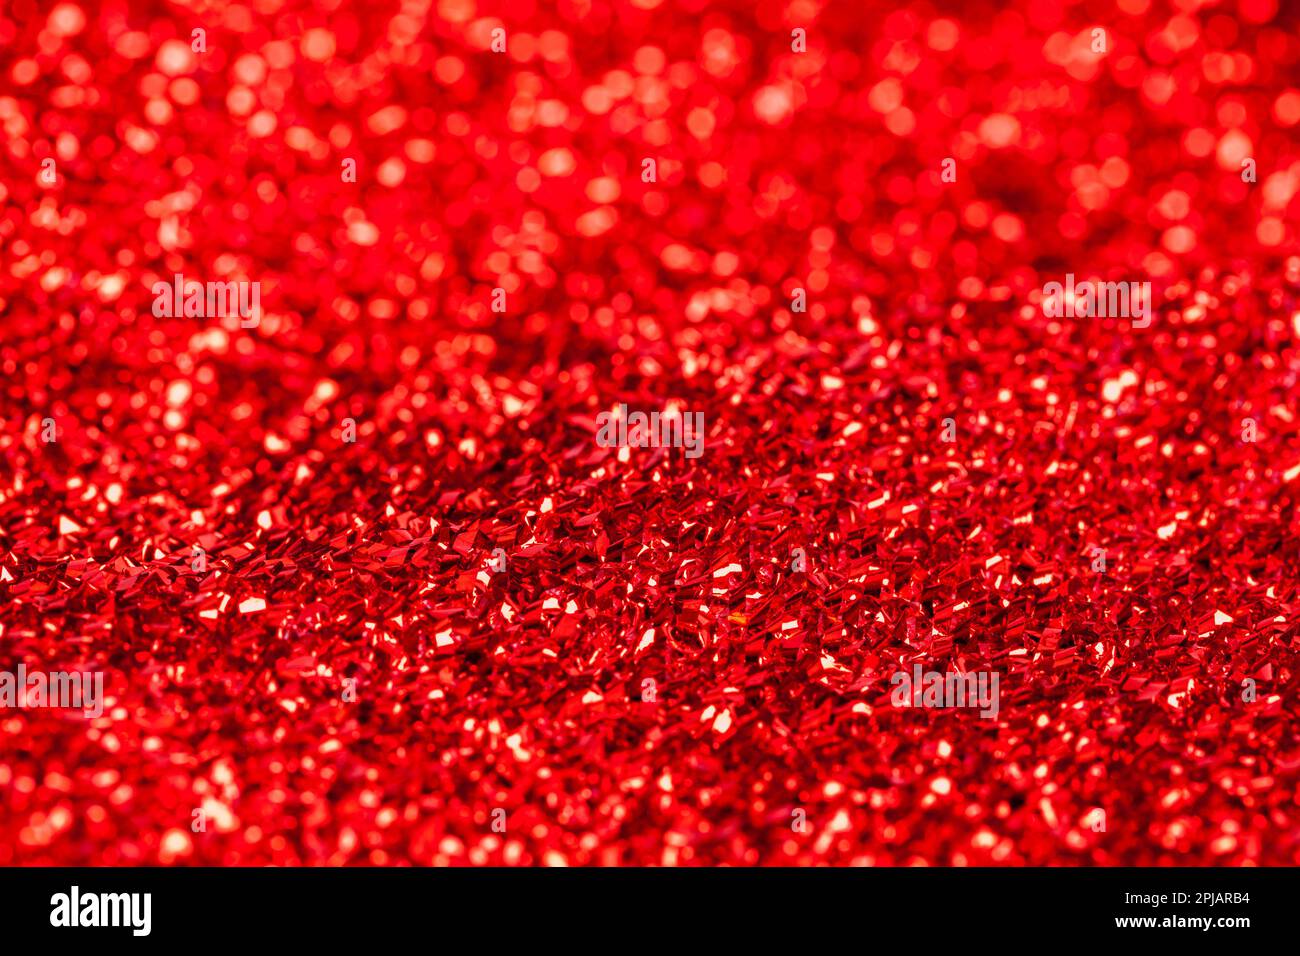 Red Sparkle Fabric Glitter Texture Background Close Up. Stock Photo